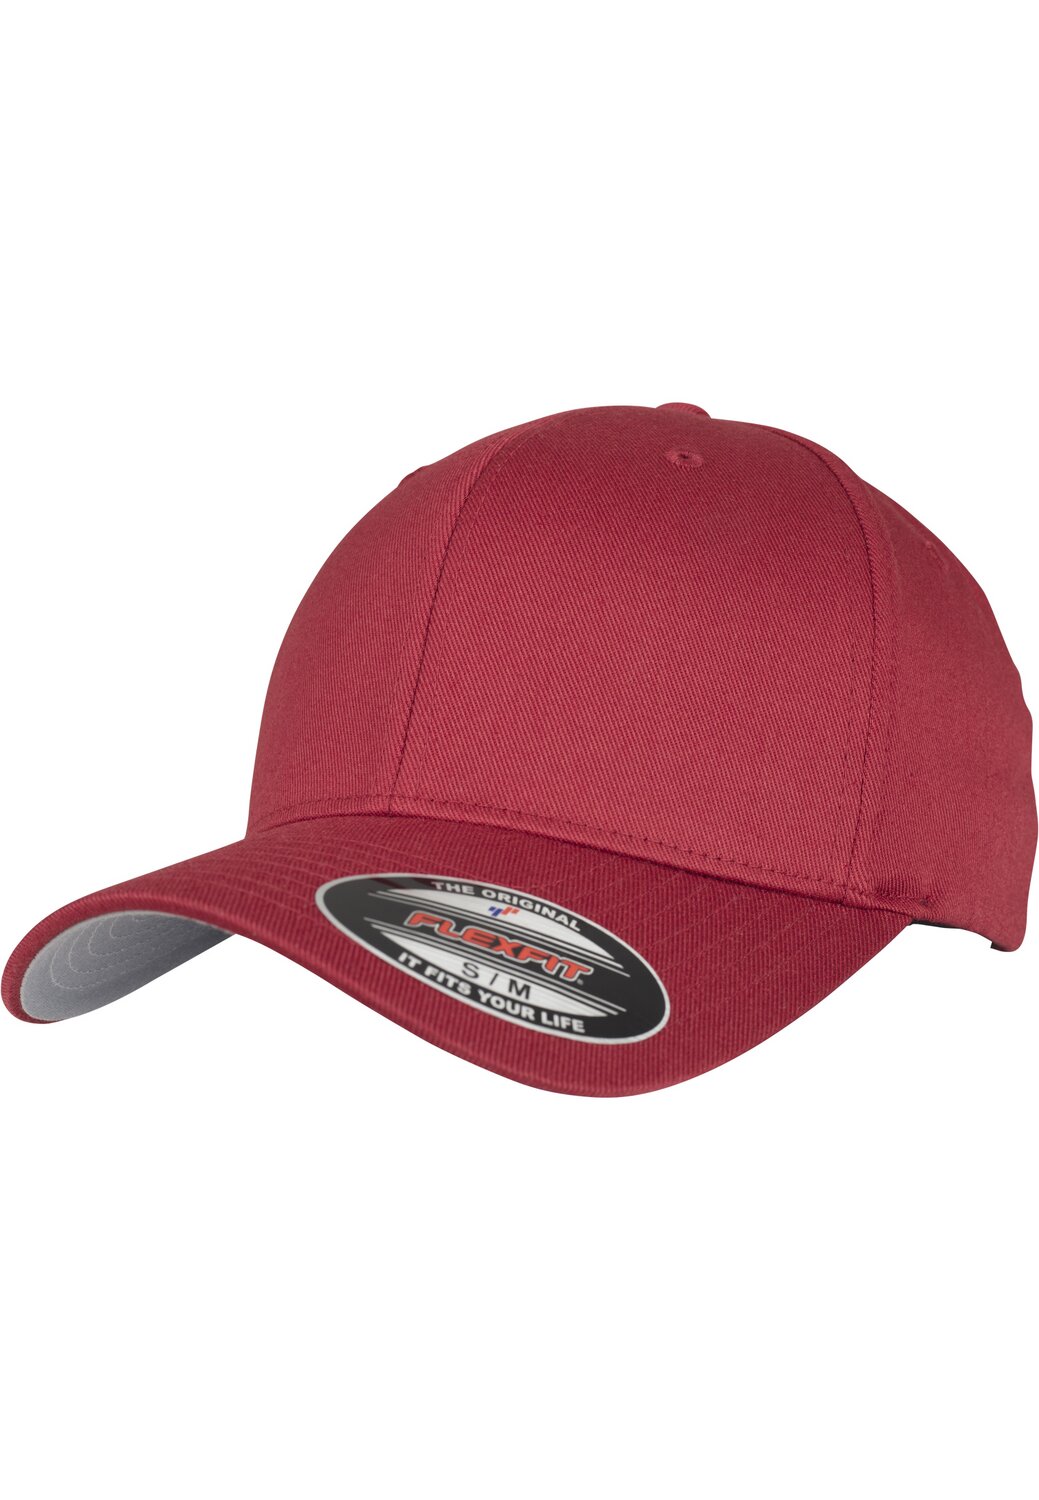 Baseball Cap Wooly Combed rose Flexfit brown MAXISCOOT 